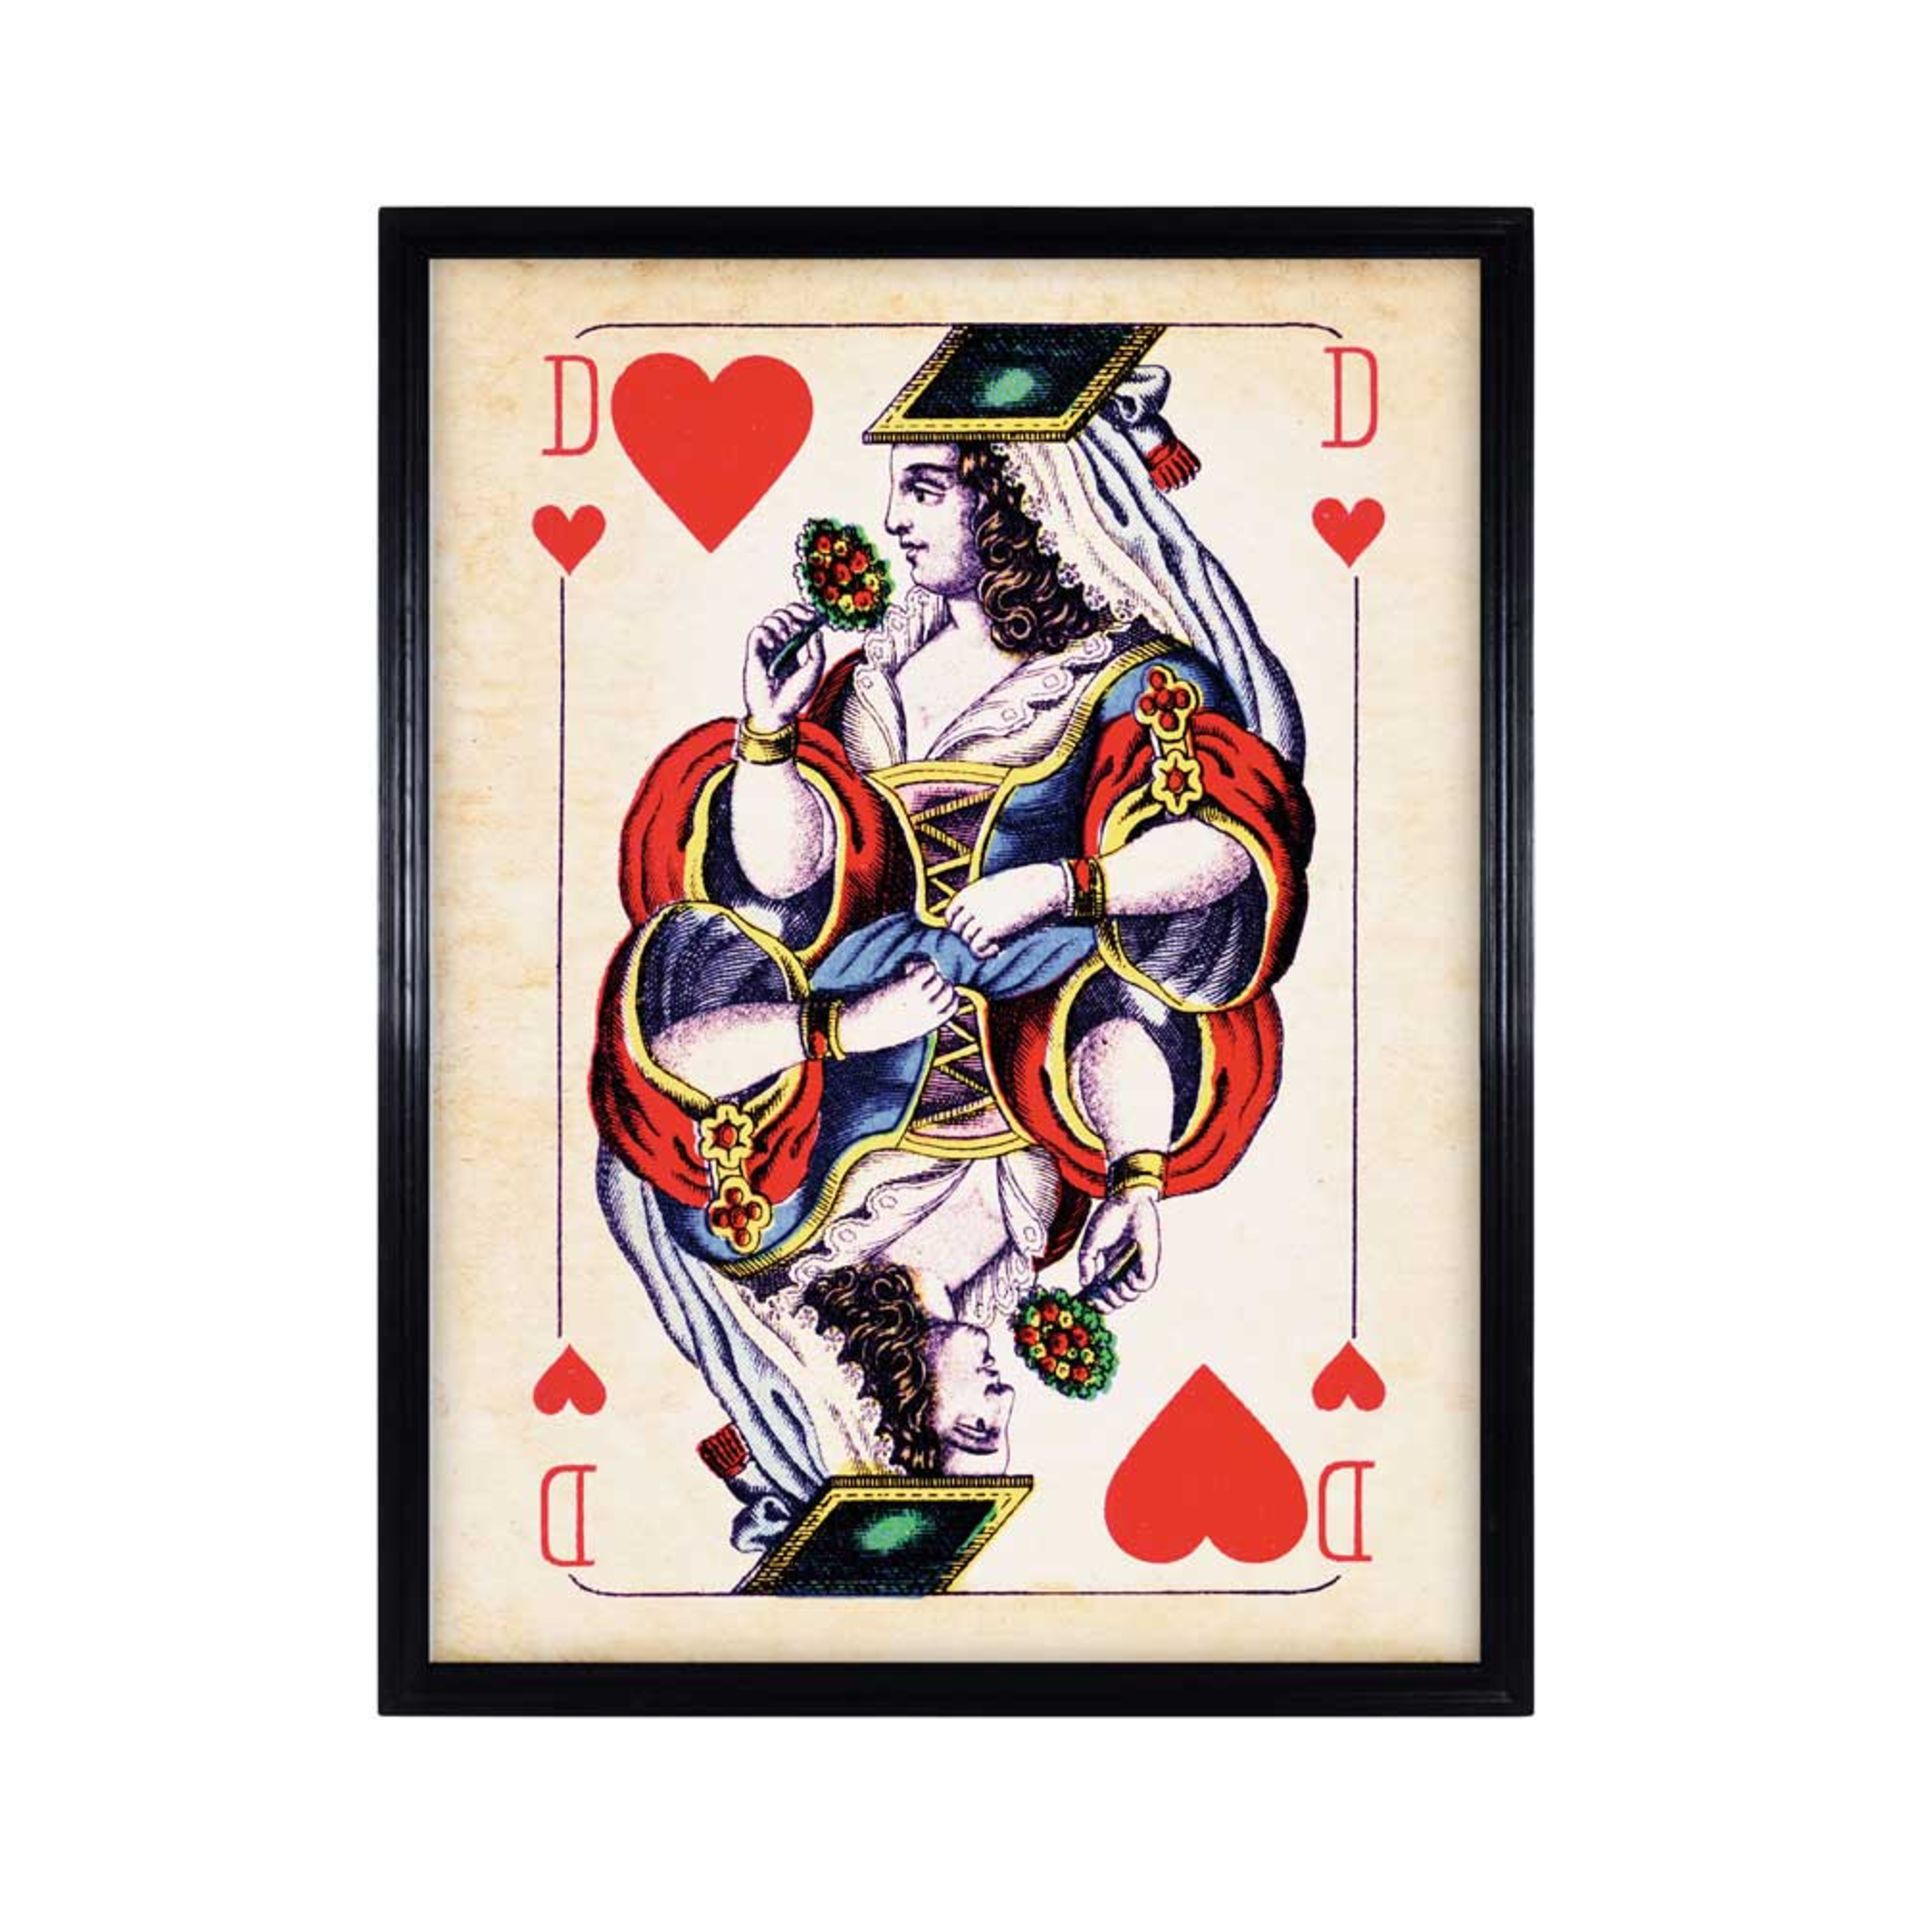 Artline Cards Dame Queen of Hearts Playful And Quirky, This Cards Art Line Is An Enlarged Version Of